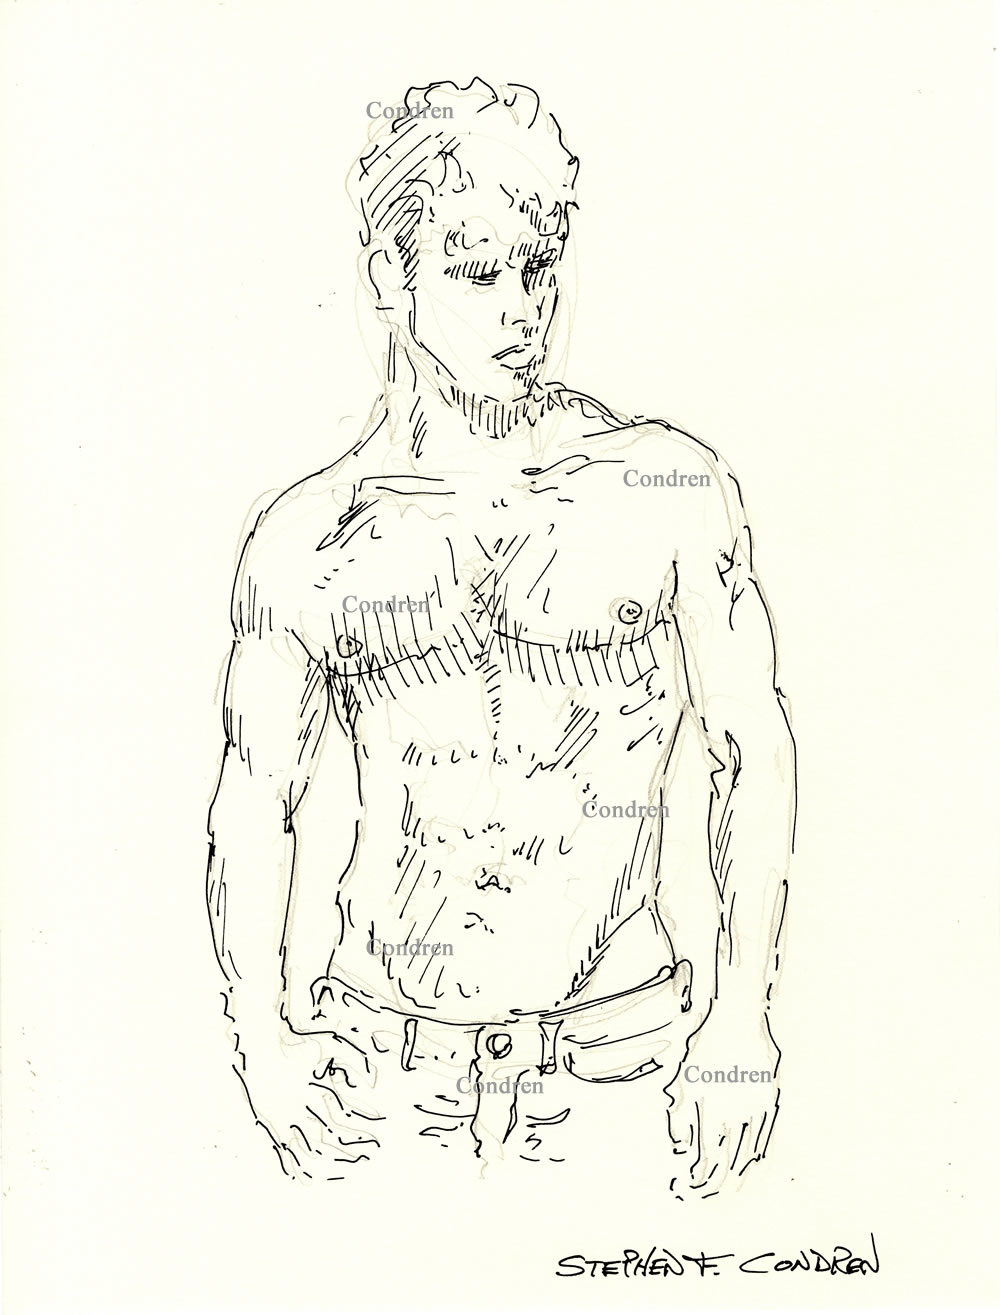 Yuval Sliper Shirtless Male Pen & Ink Figure Drawing. He has a hard body and a muscular physique and firm pecs.